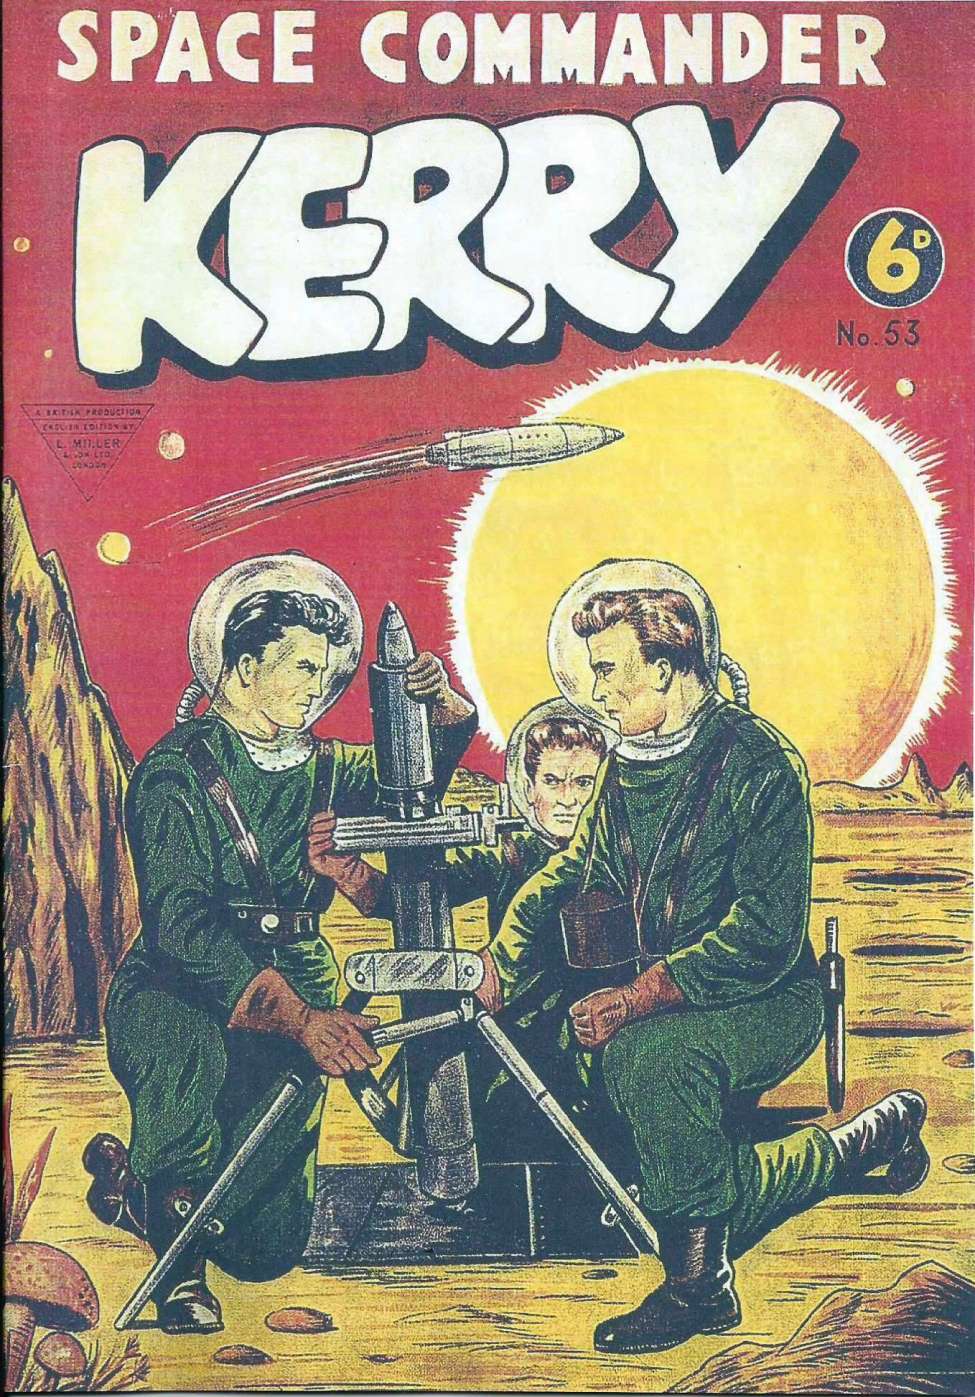 Comic Book Cover For Space Commander Kerry 53